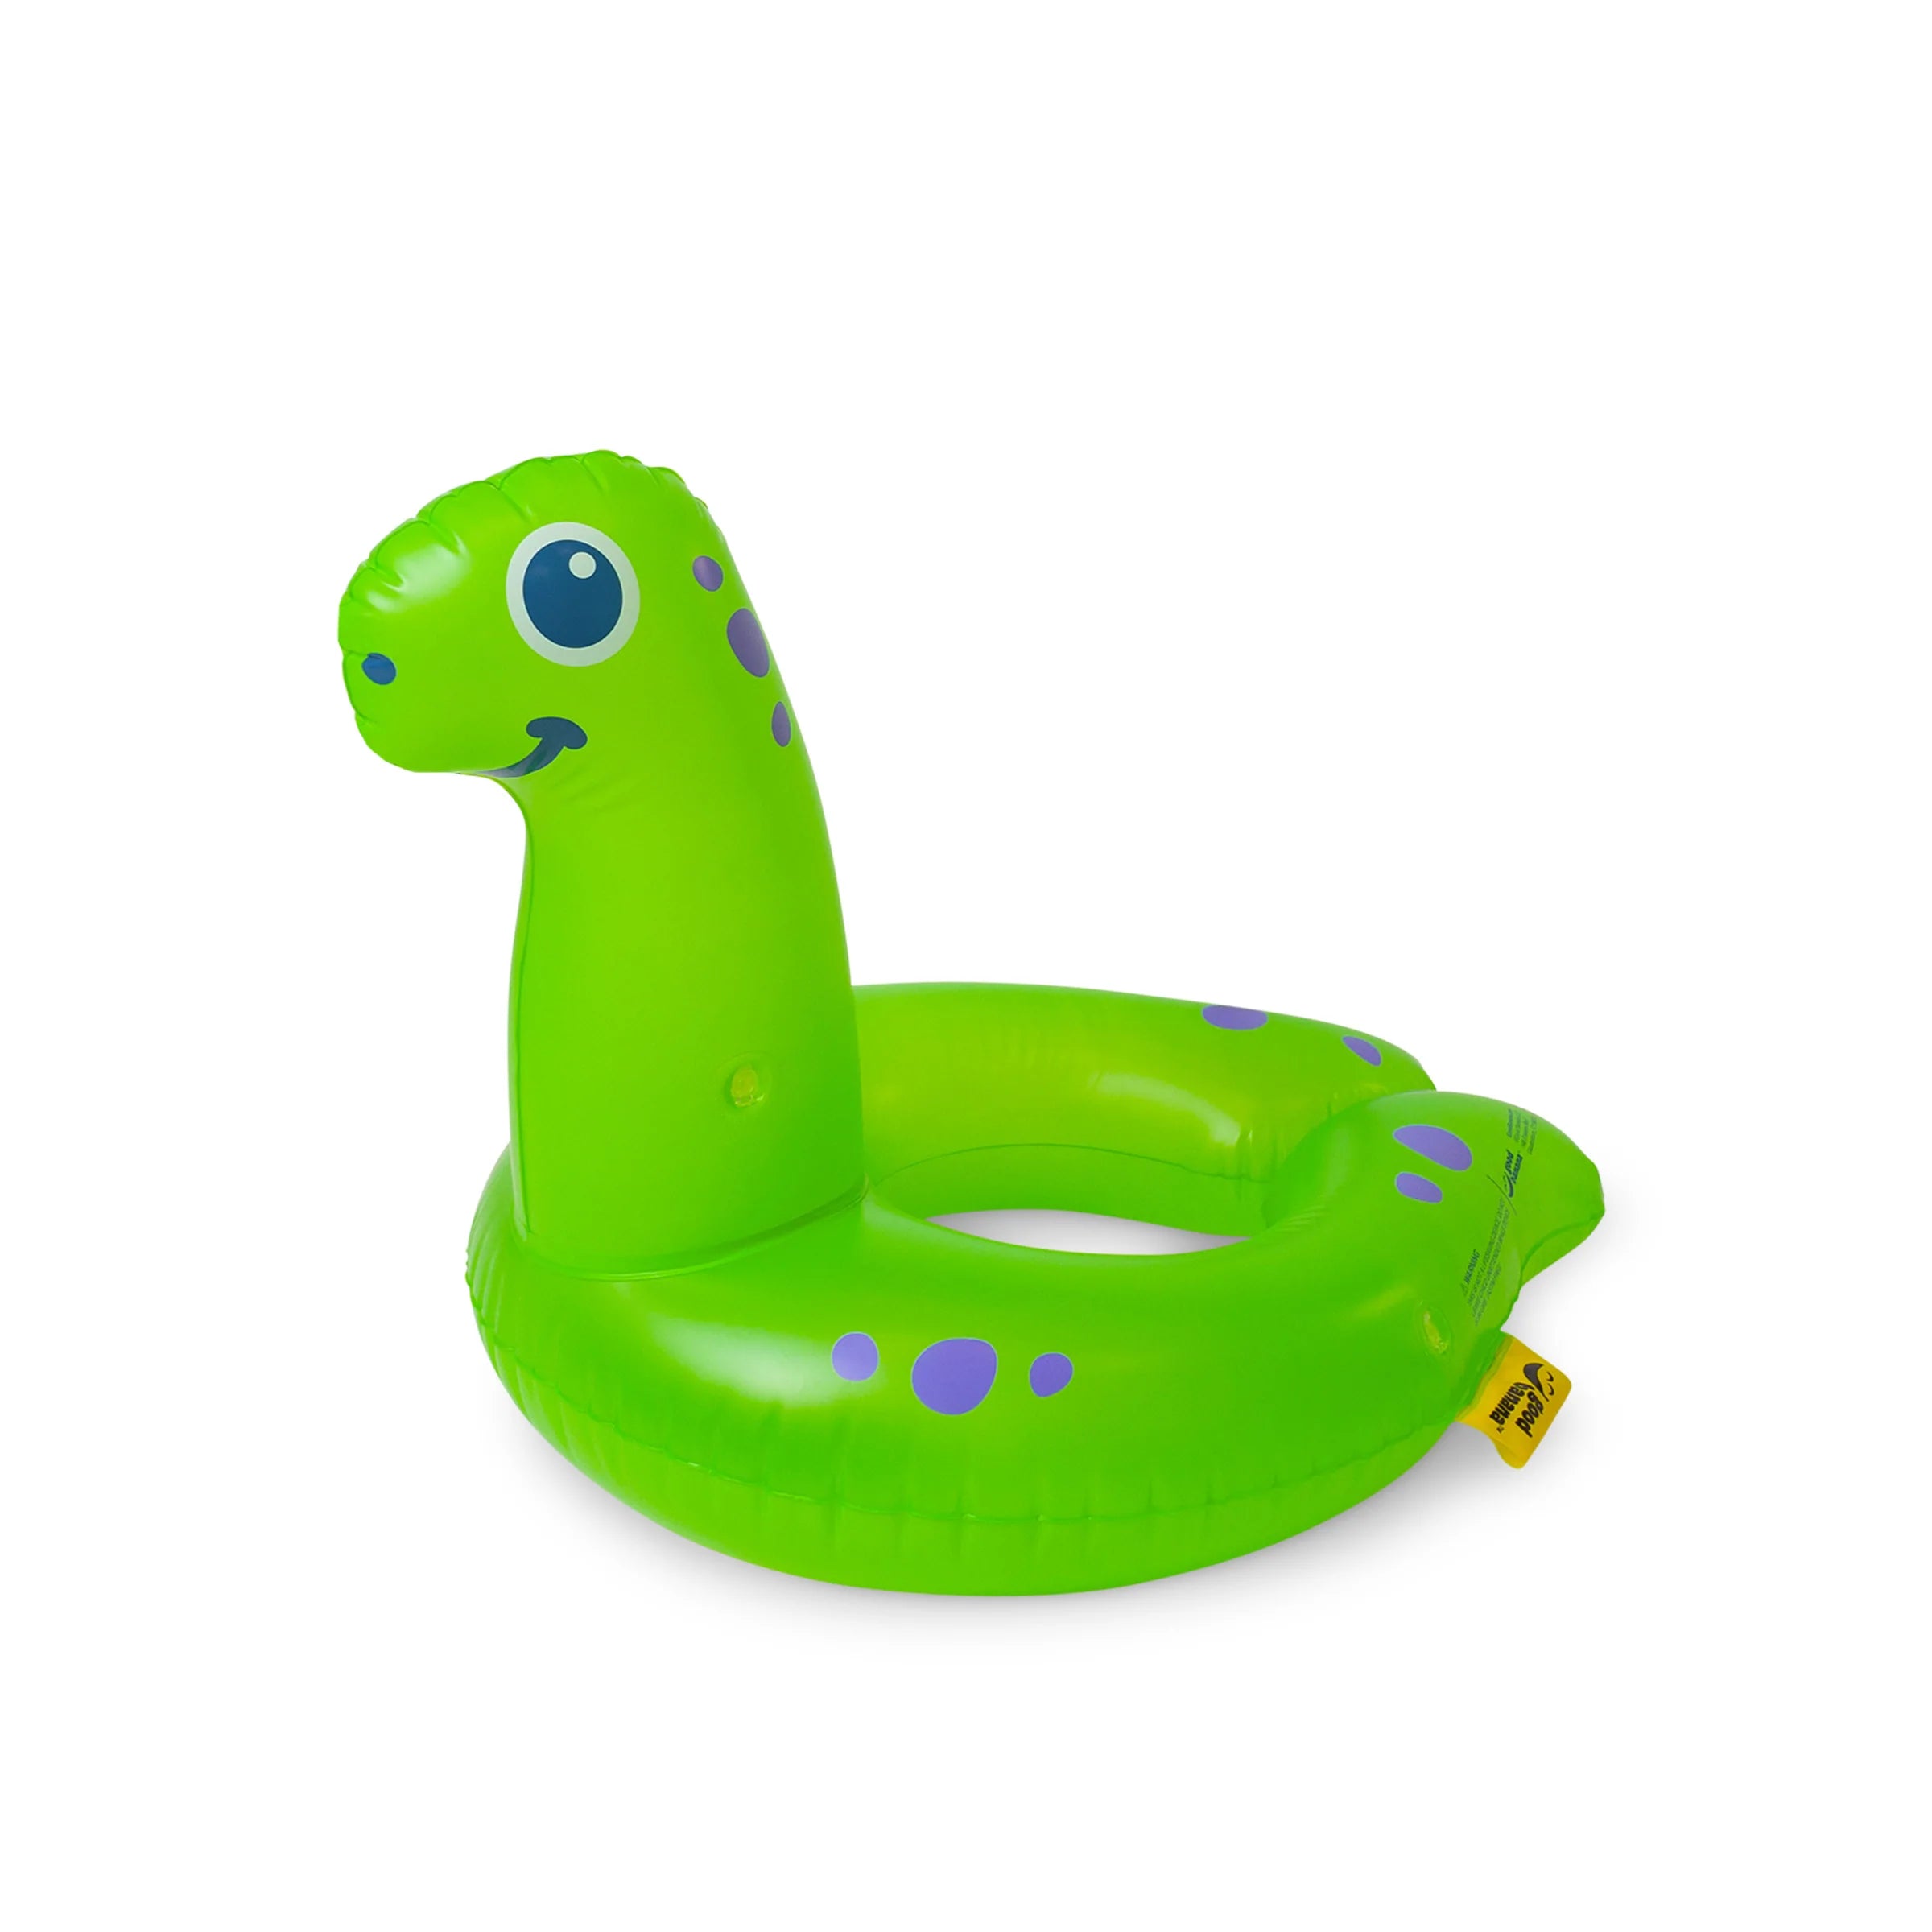 The Best Floats / Dino Floats UK